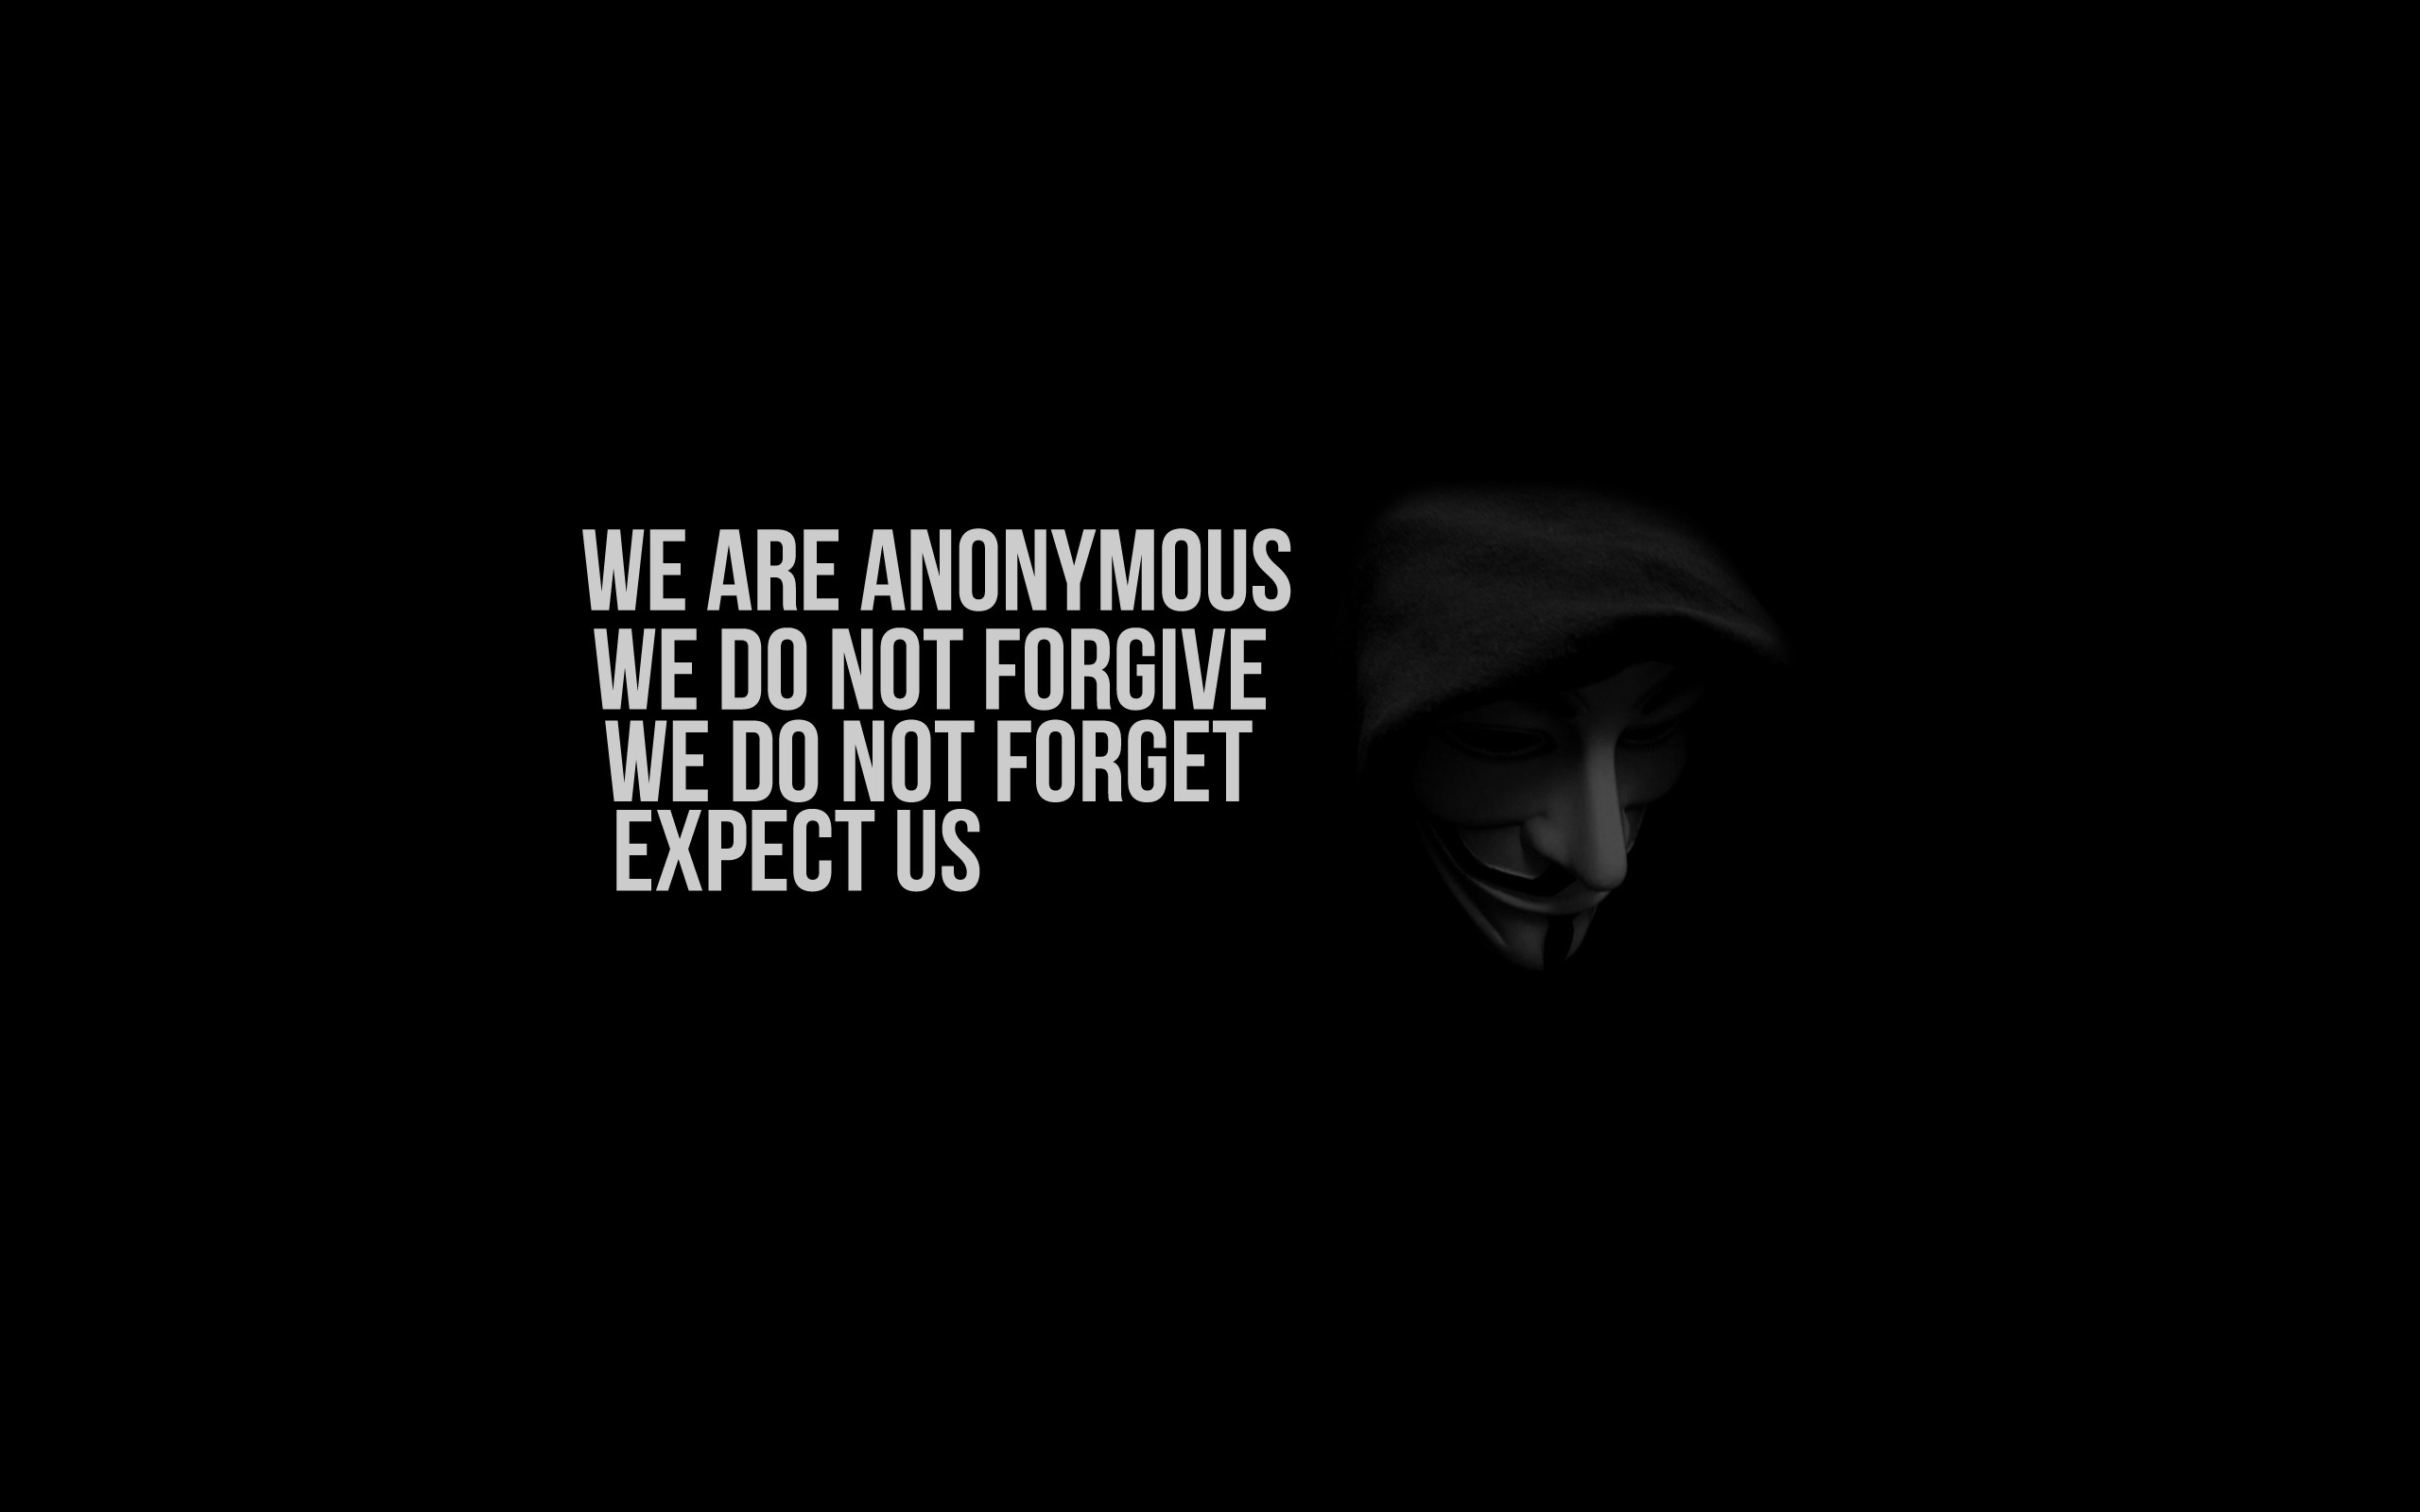  fawkes v for vendetta hoodie we are legion expect us Art HD Wallpaper 2560x1600